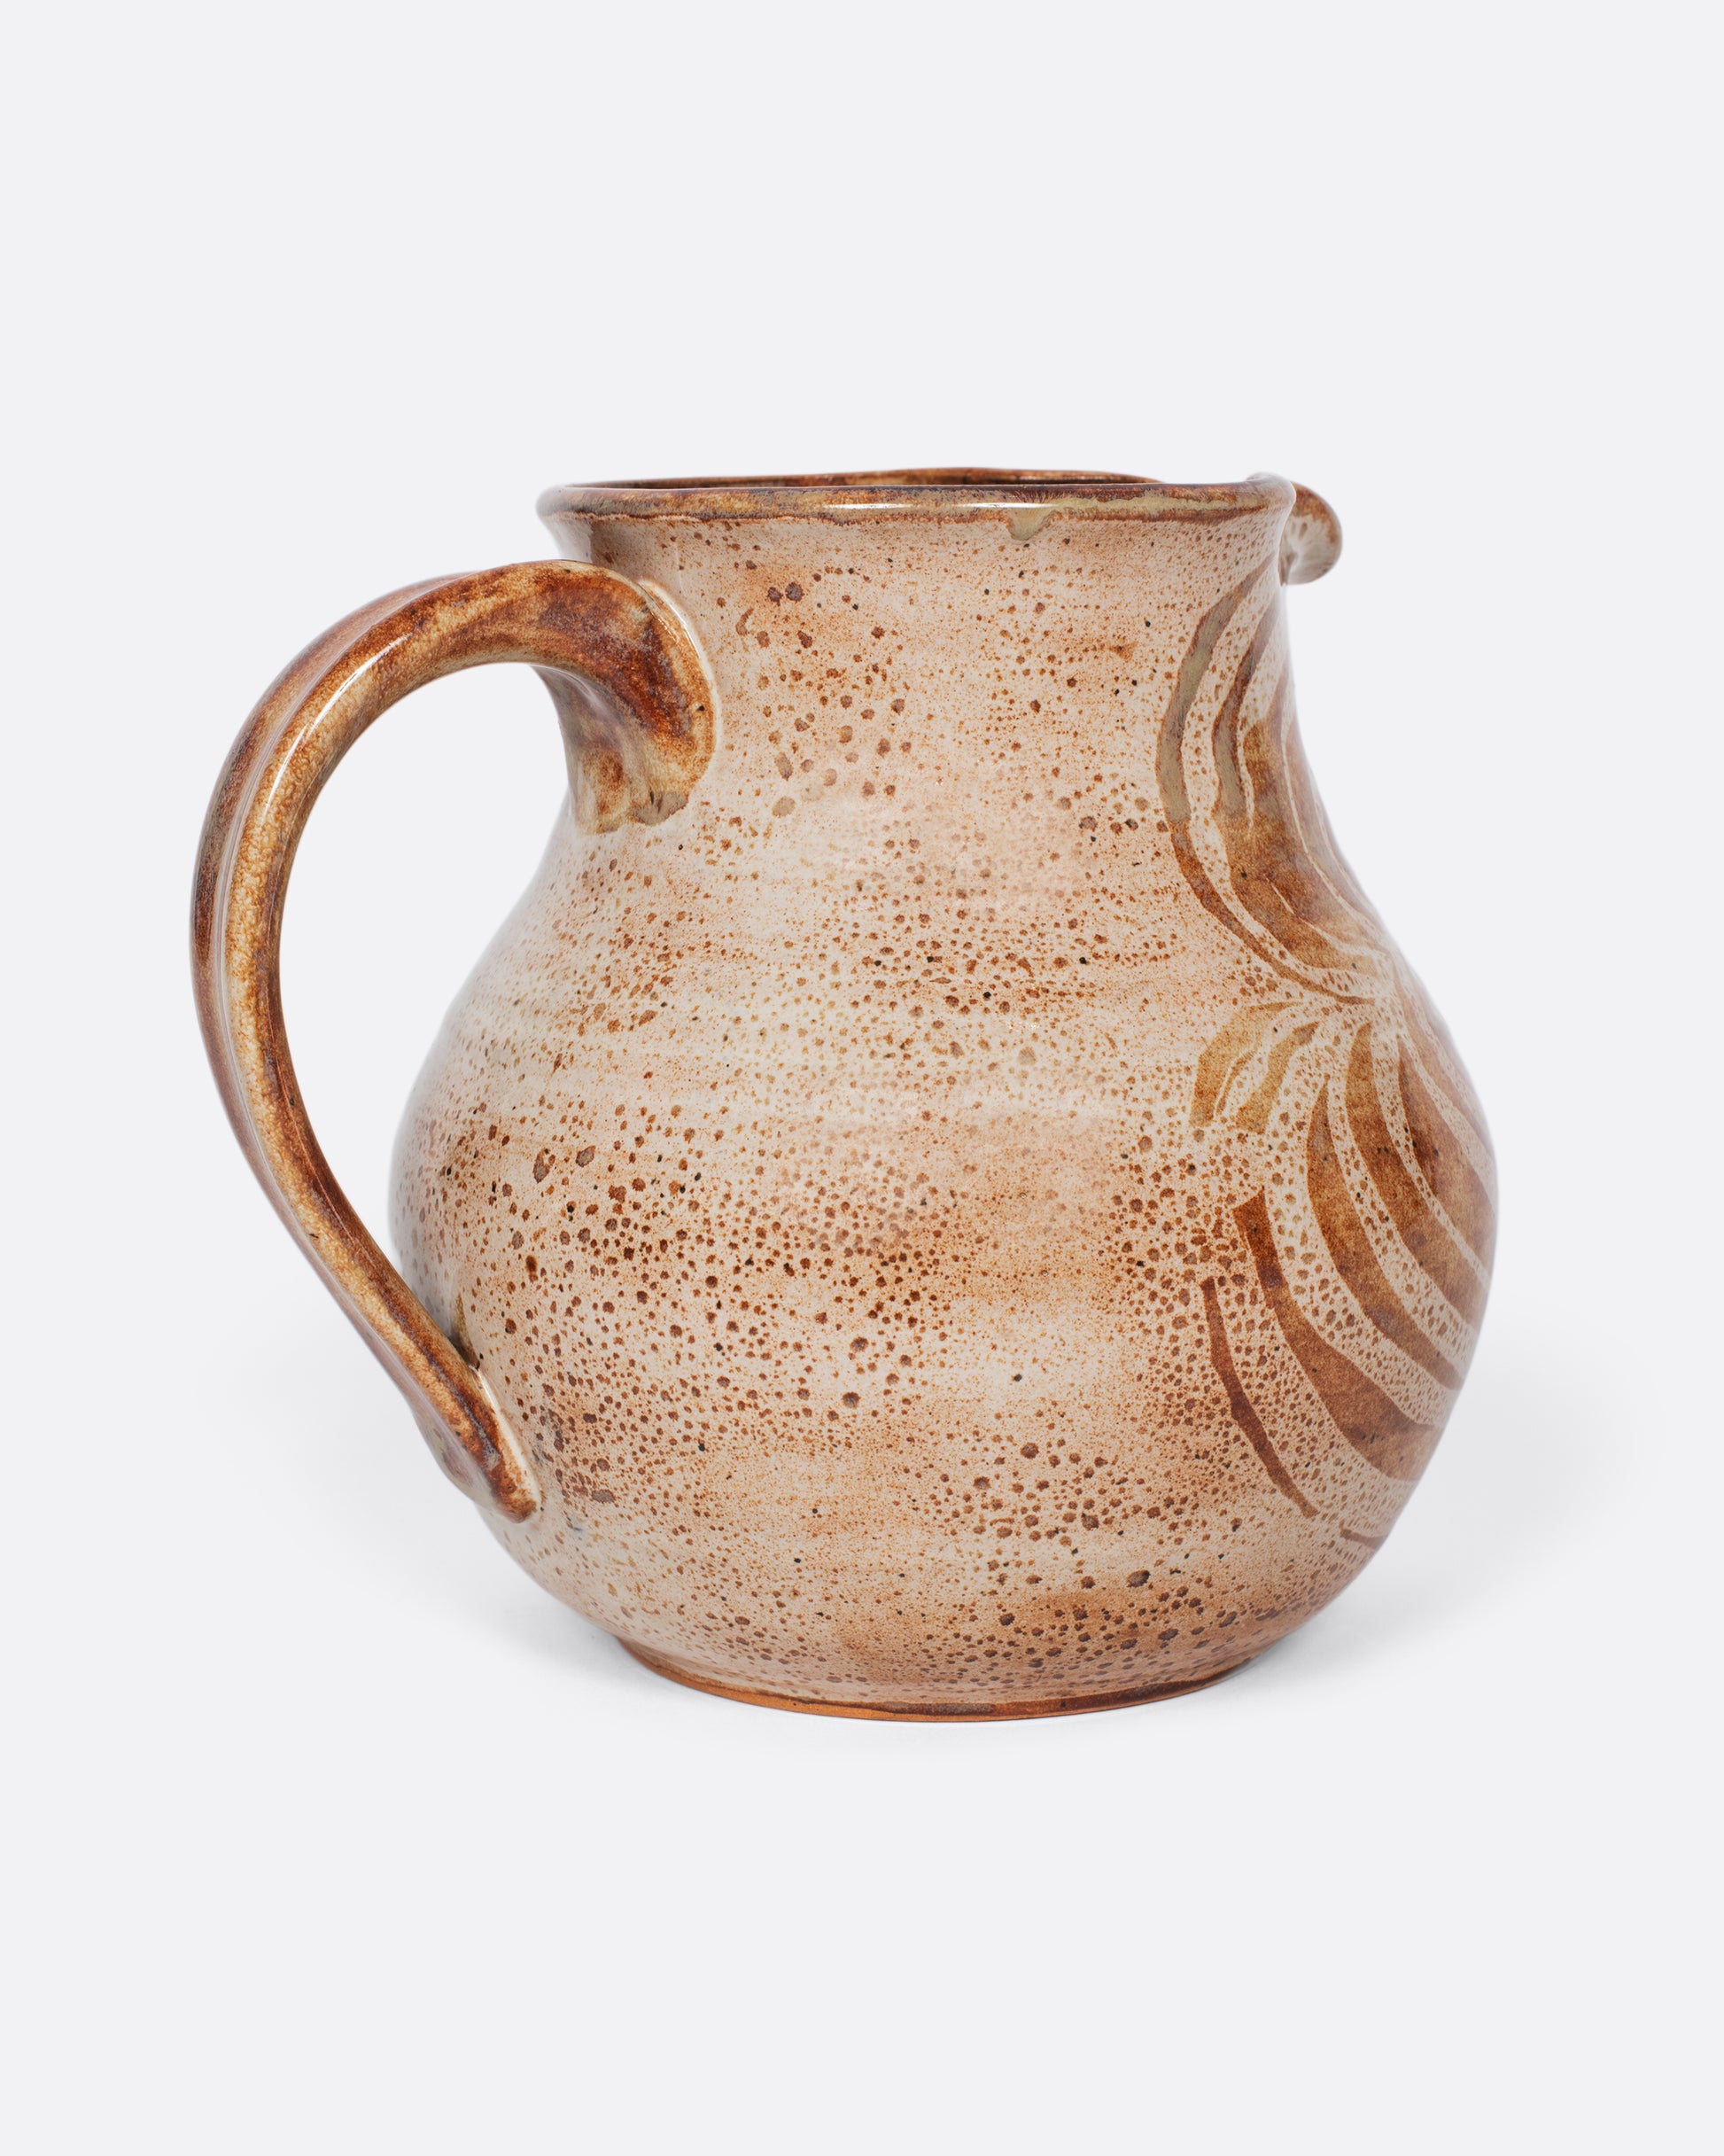 A studio-made, beautifully weighted, rounded ceramic pitcher with a brown swirl design that mimics a blossoming flower.